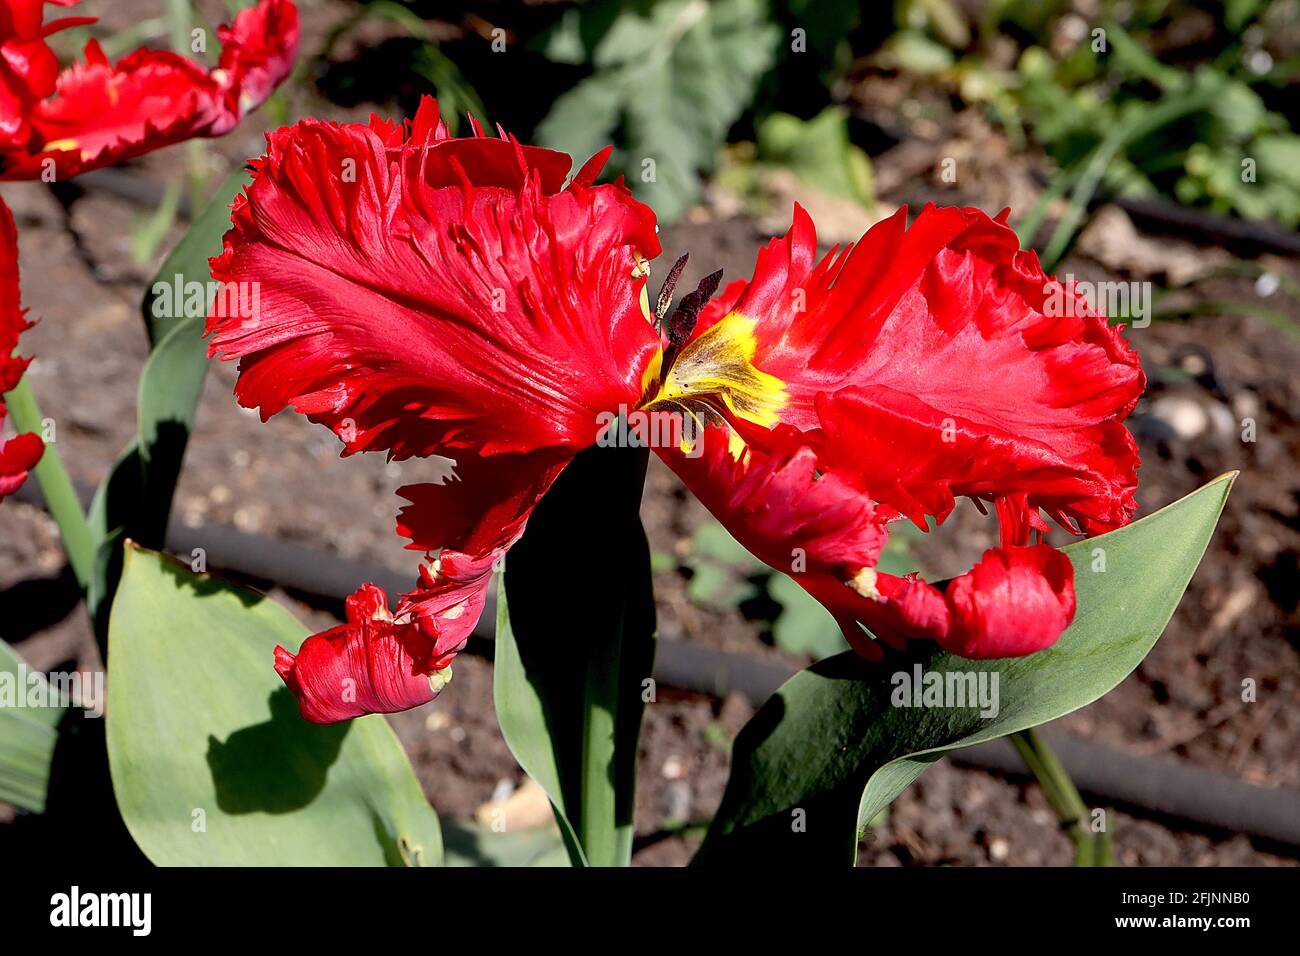 Tulipa gesneriana var dracontia ‘Red Parrot’  Parrot 10 Red Parrot tulip - twisted scarlet red petals, April, England, UK Stock Photo